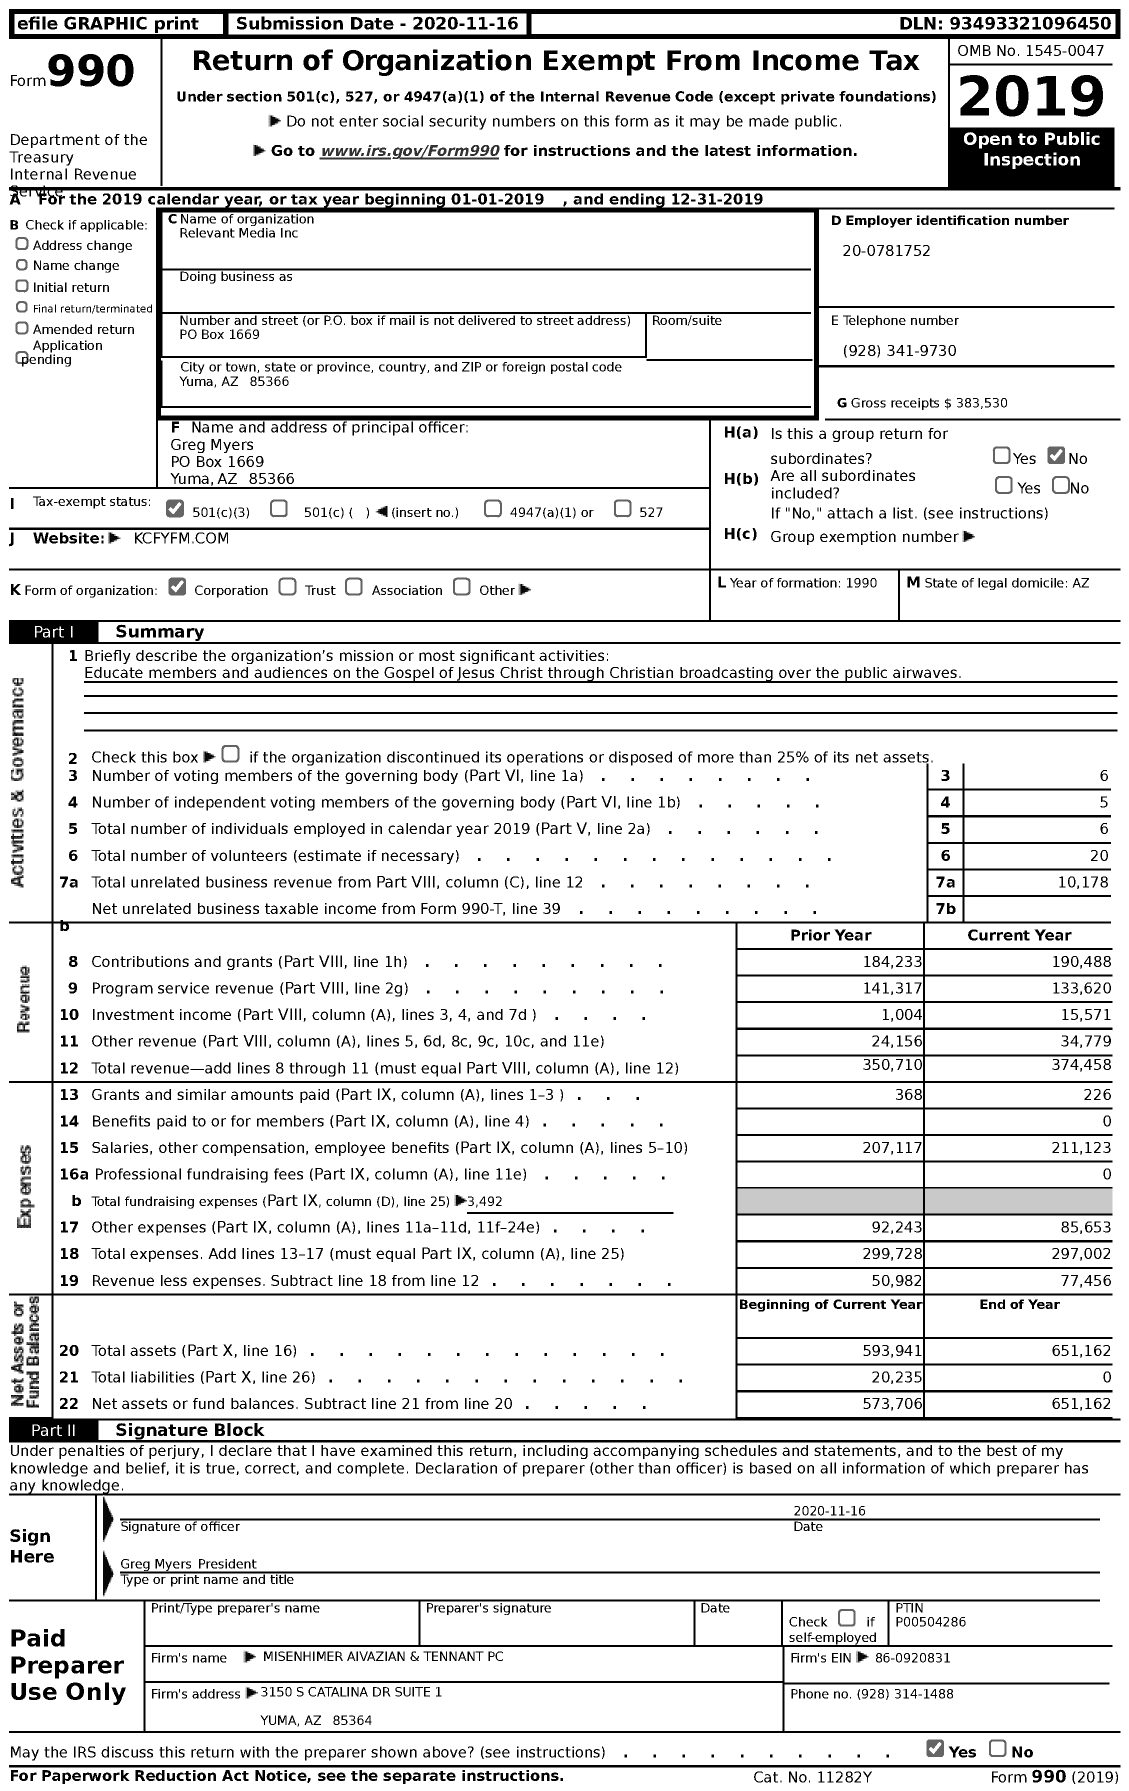 Image of first page of 2019 Form 990 for Relevant Media